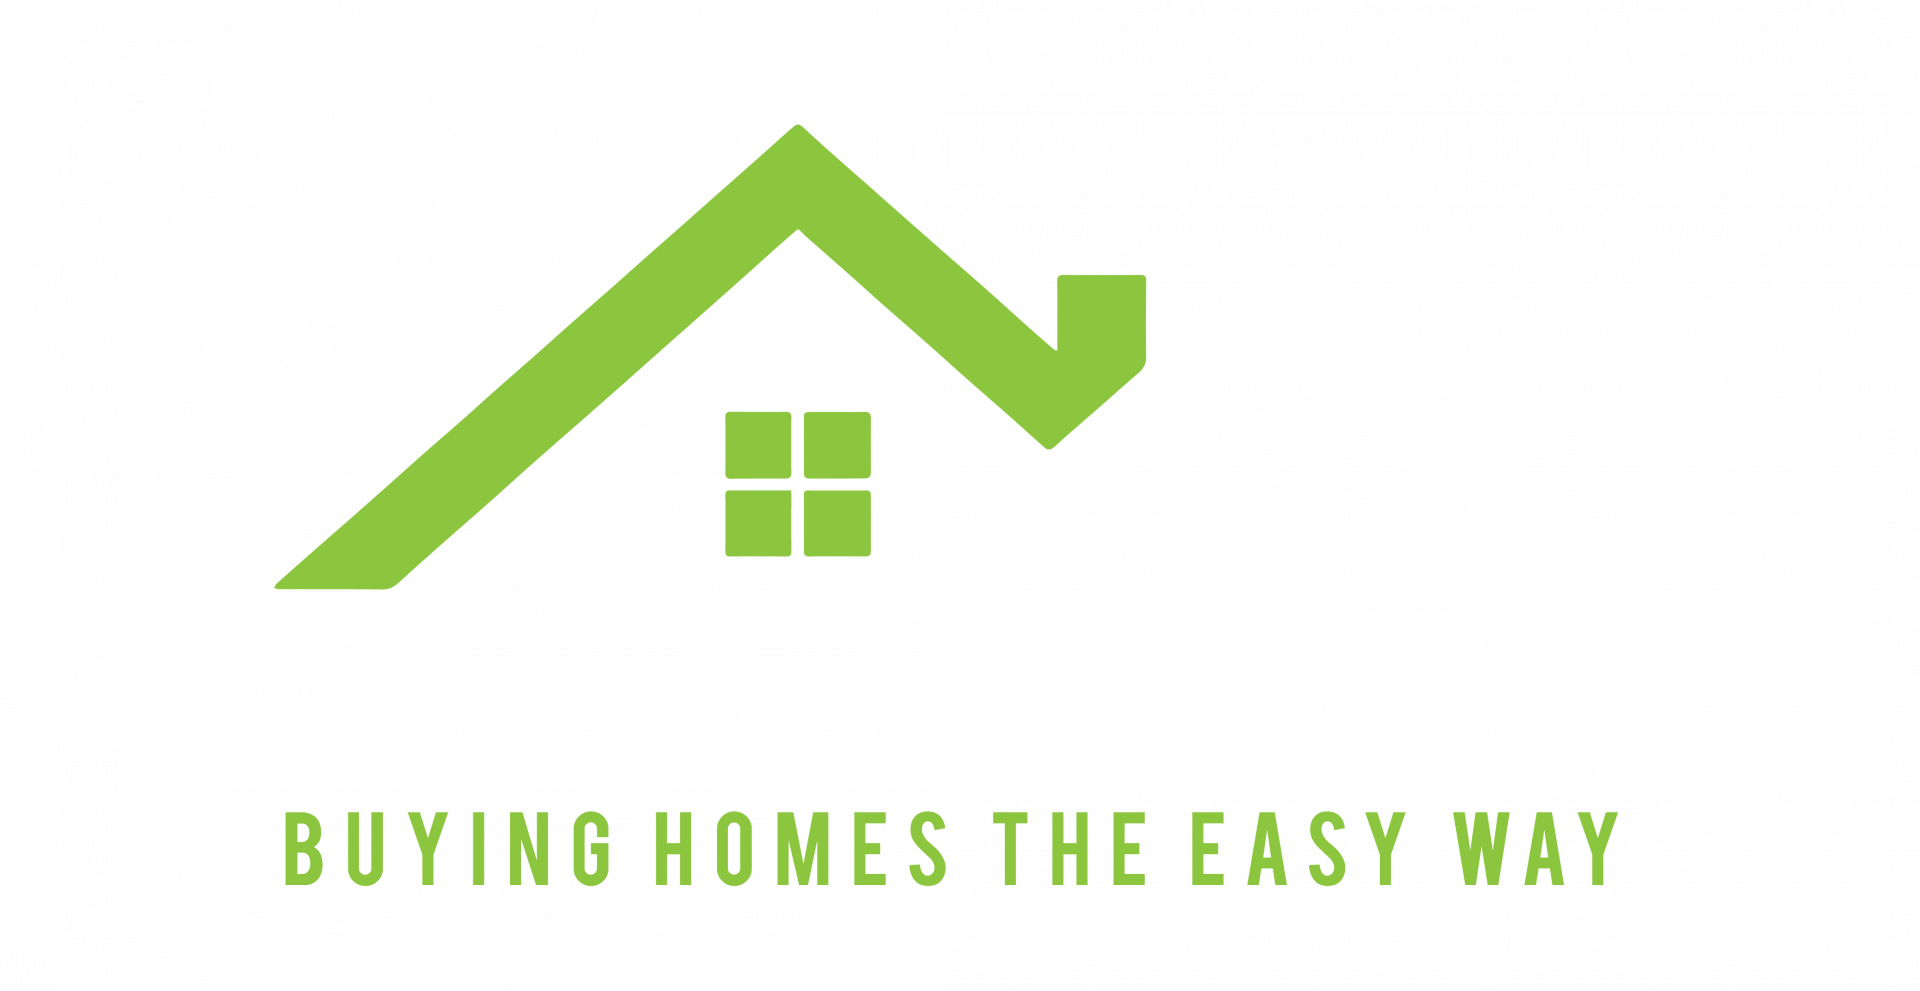 Sell My House Fast New Jersey [We Buy Houses NJ] Cash Home Buyers In NJ logo